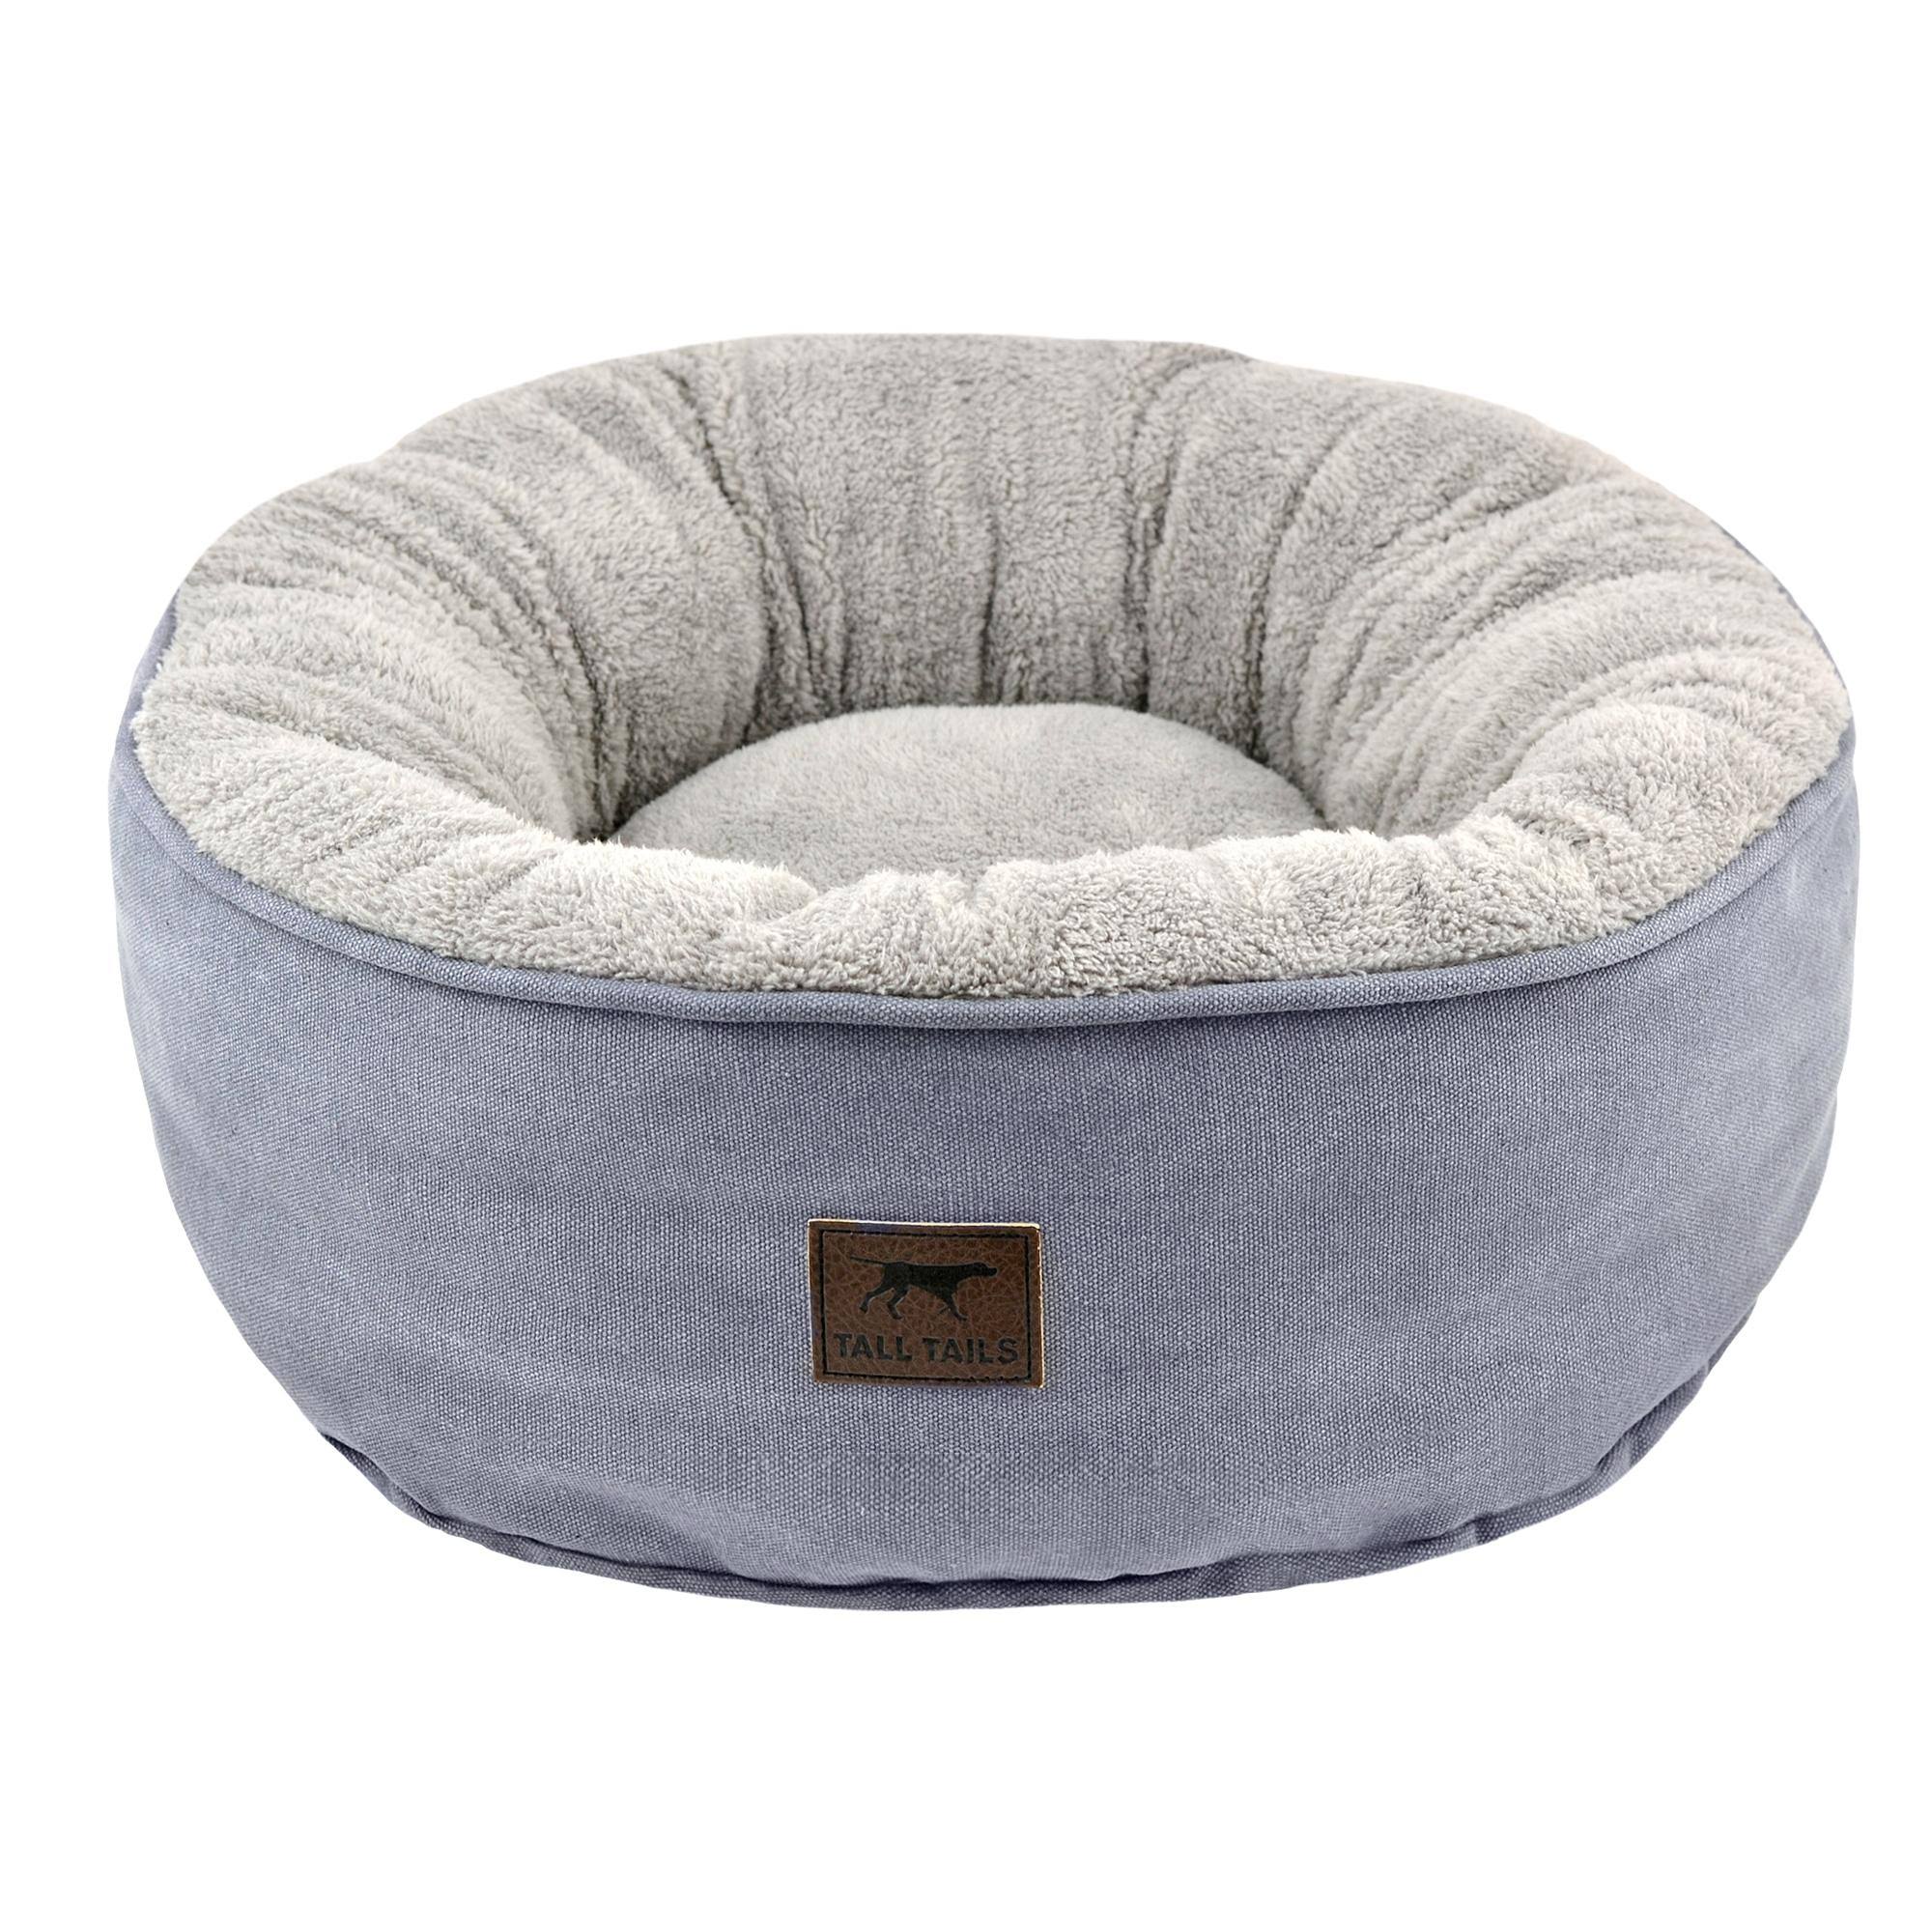 Tall Tails Donut Bed Small / Charcoal